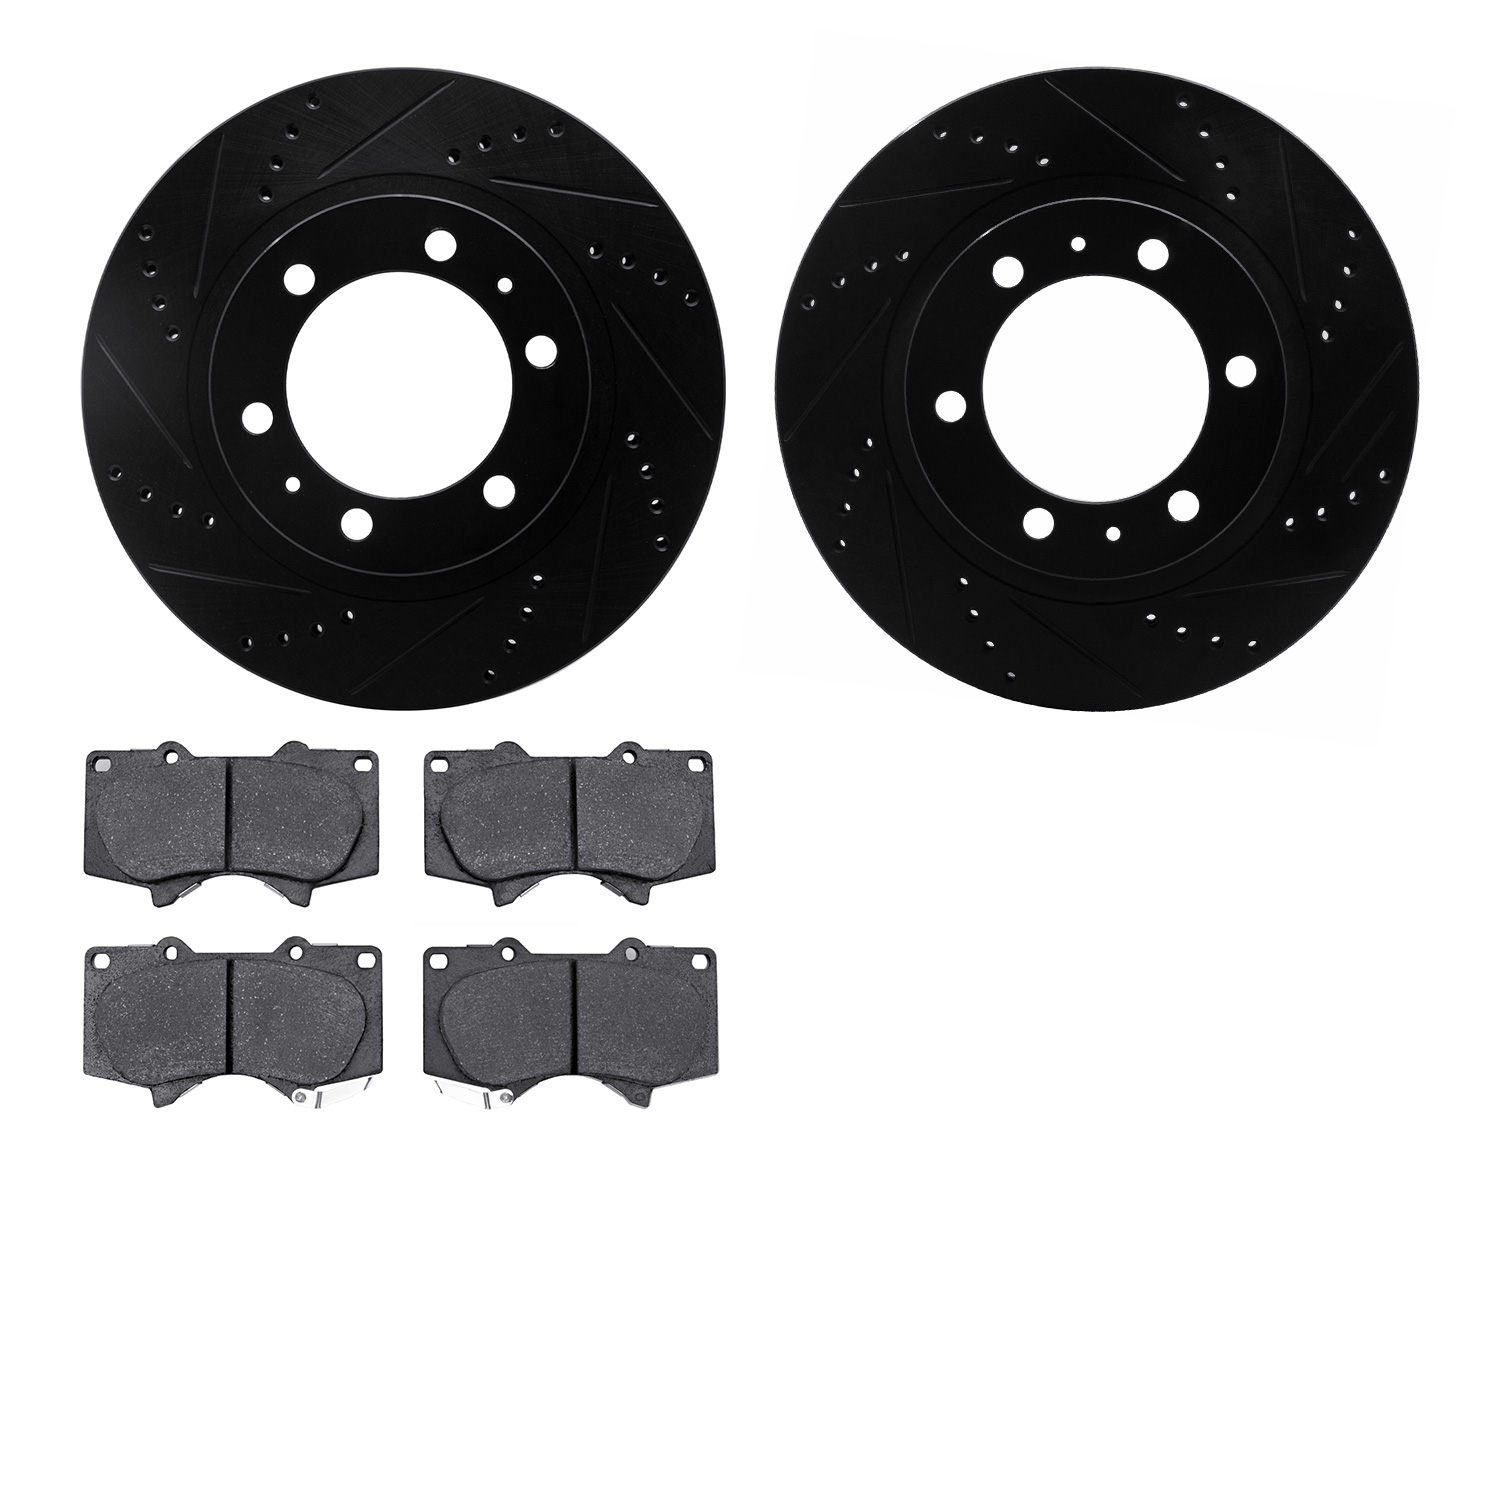 8402-76018 Drilled/Slotted Brake Rotors with Ultimate-Duty Brake Pads Kit [Black], Fits Select Lexus/Toyota/Scion, Position: Fro